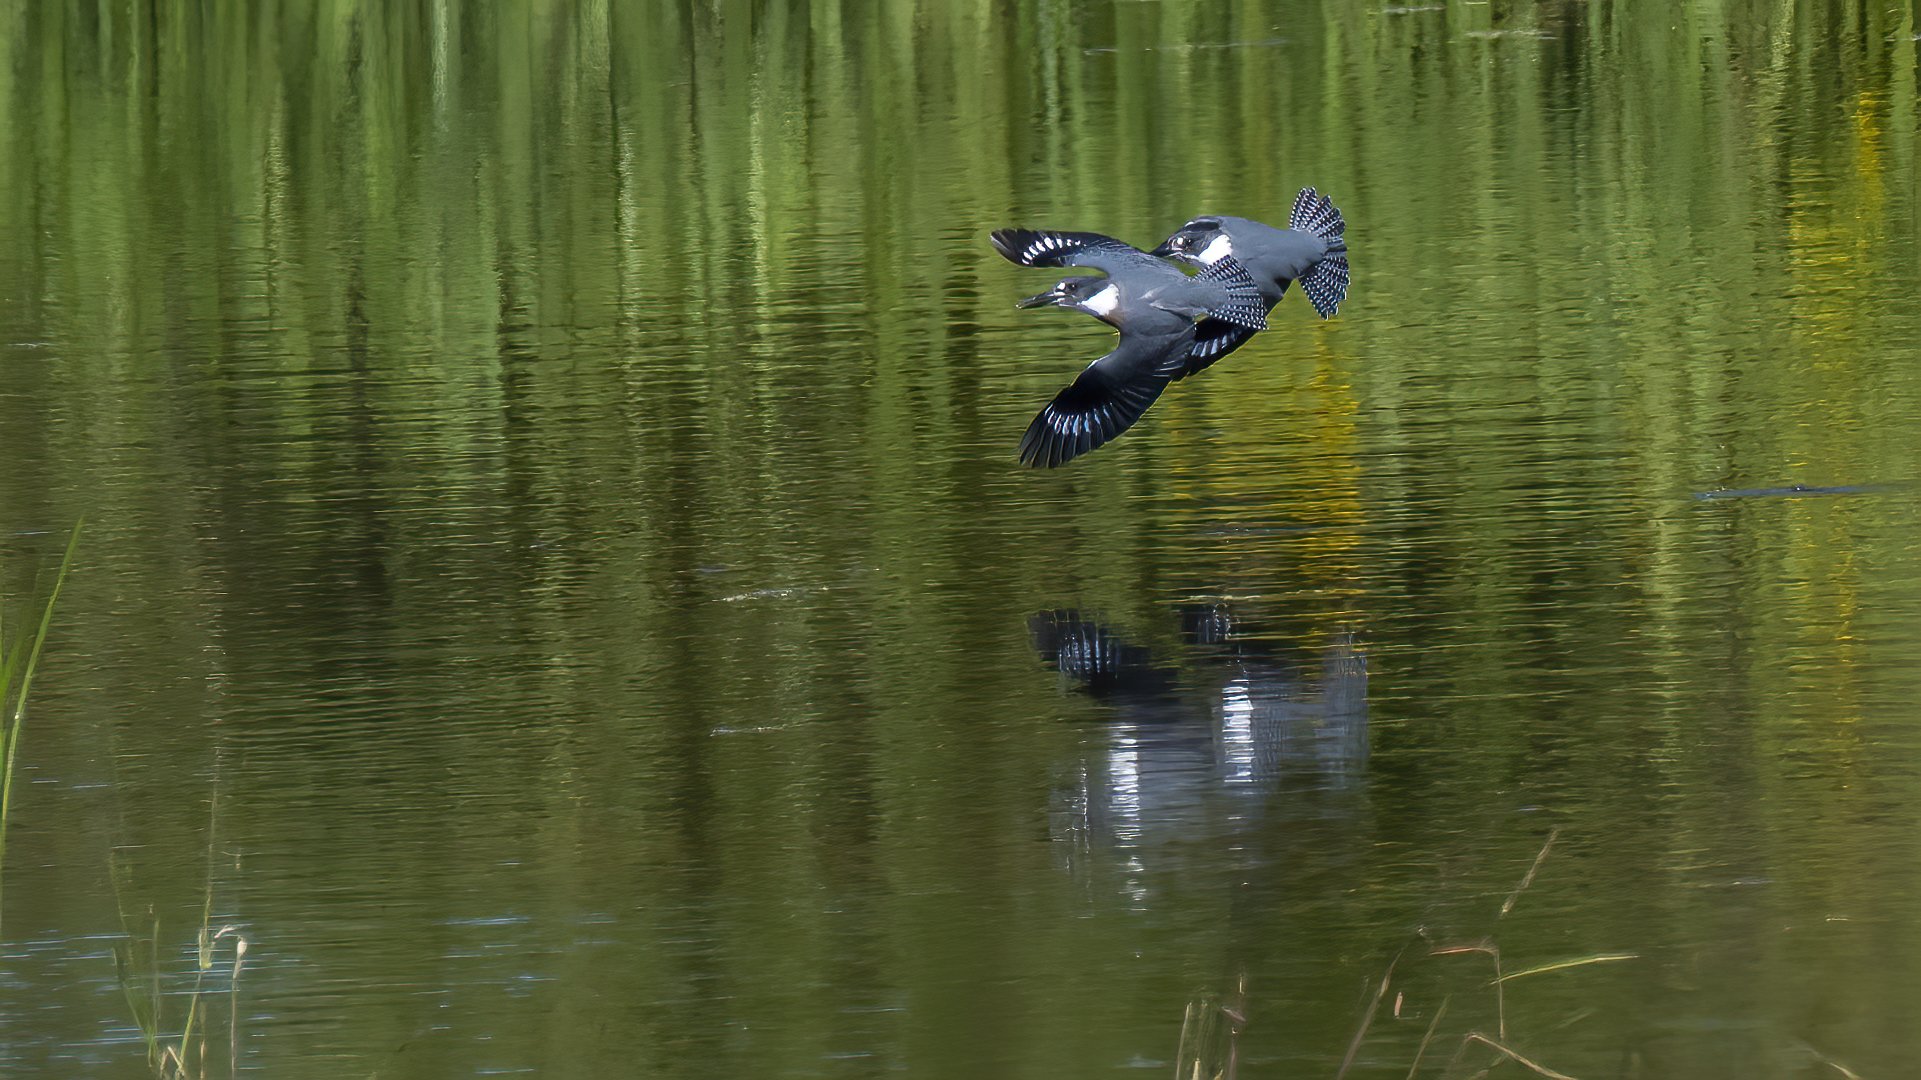 15 A pair of kingfishers play a game of tag over the river.jpg